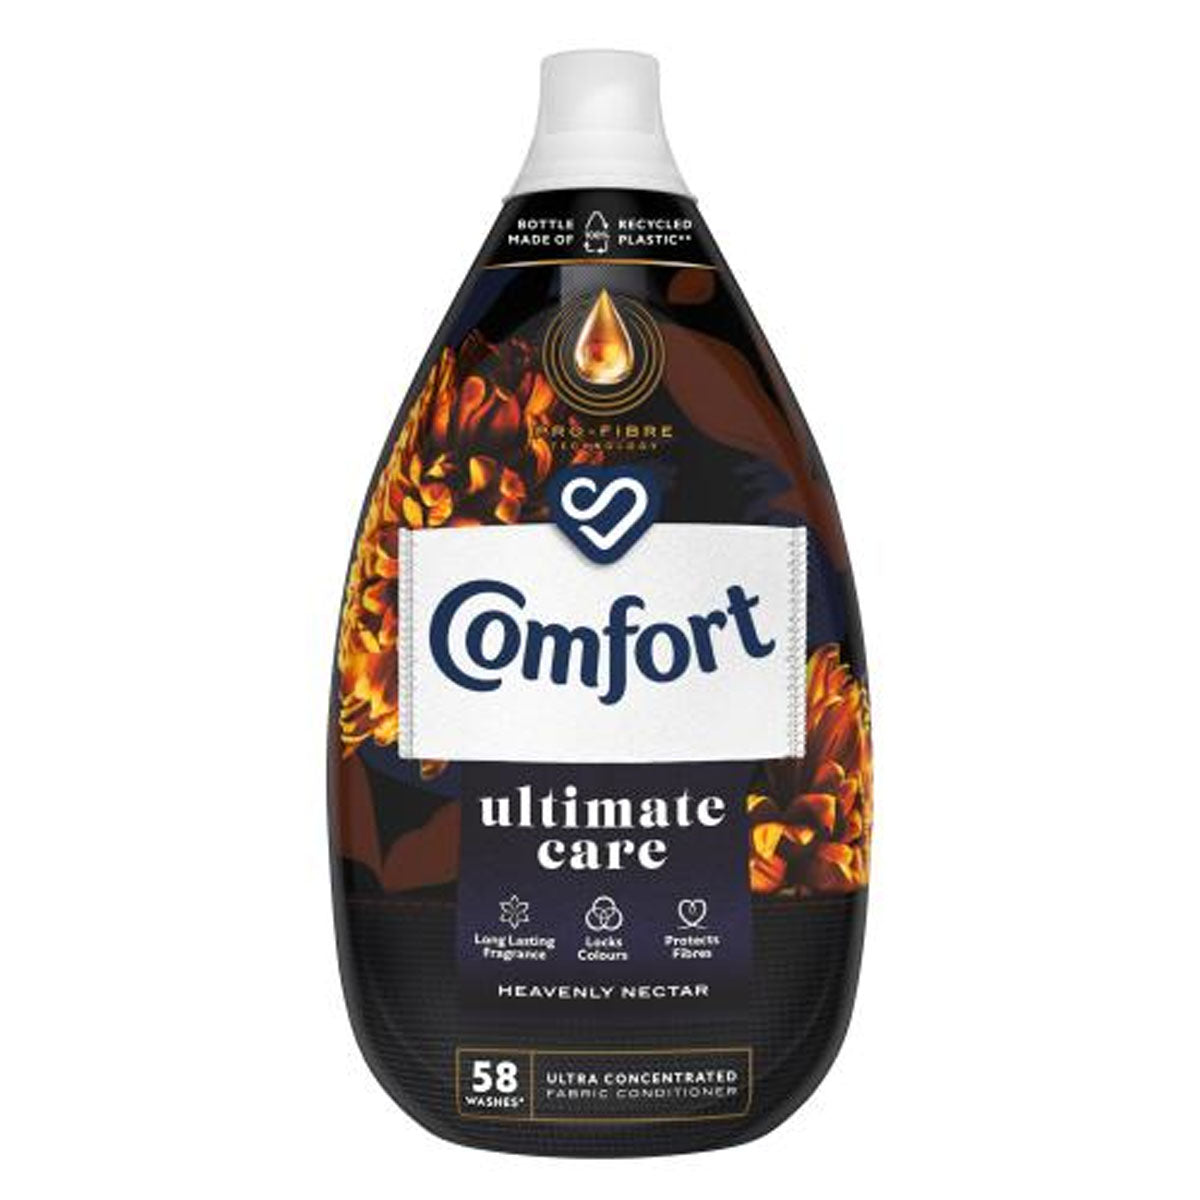 Comfort - Heavenly Nectar Fabric Conditioner 58 Wash - 870ml - Continental Food Store